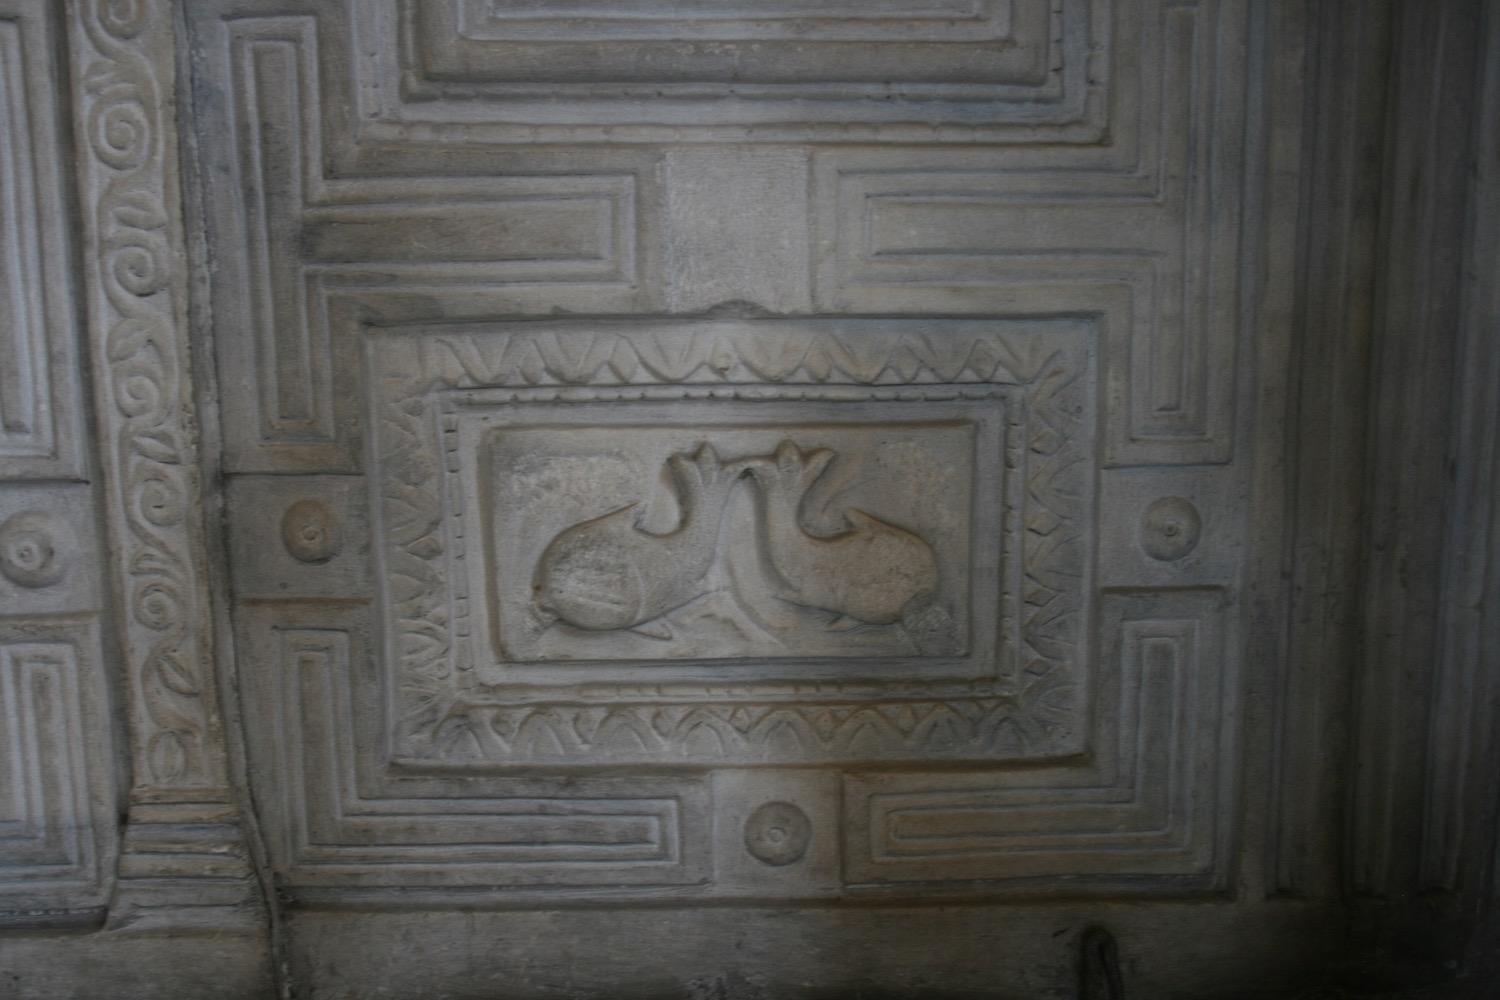 a stone carving on a wall